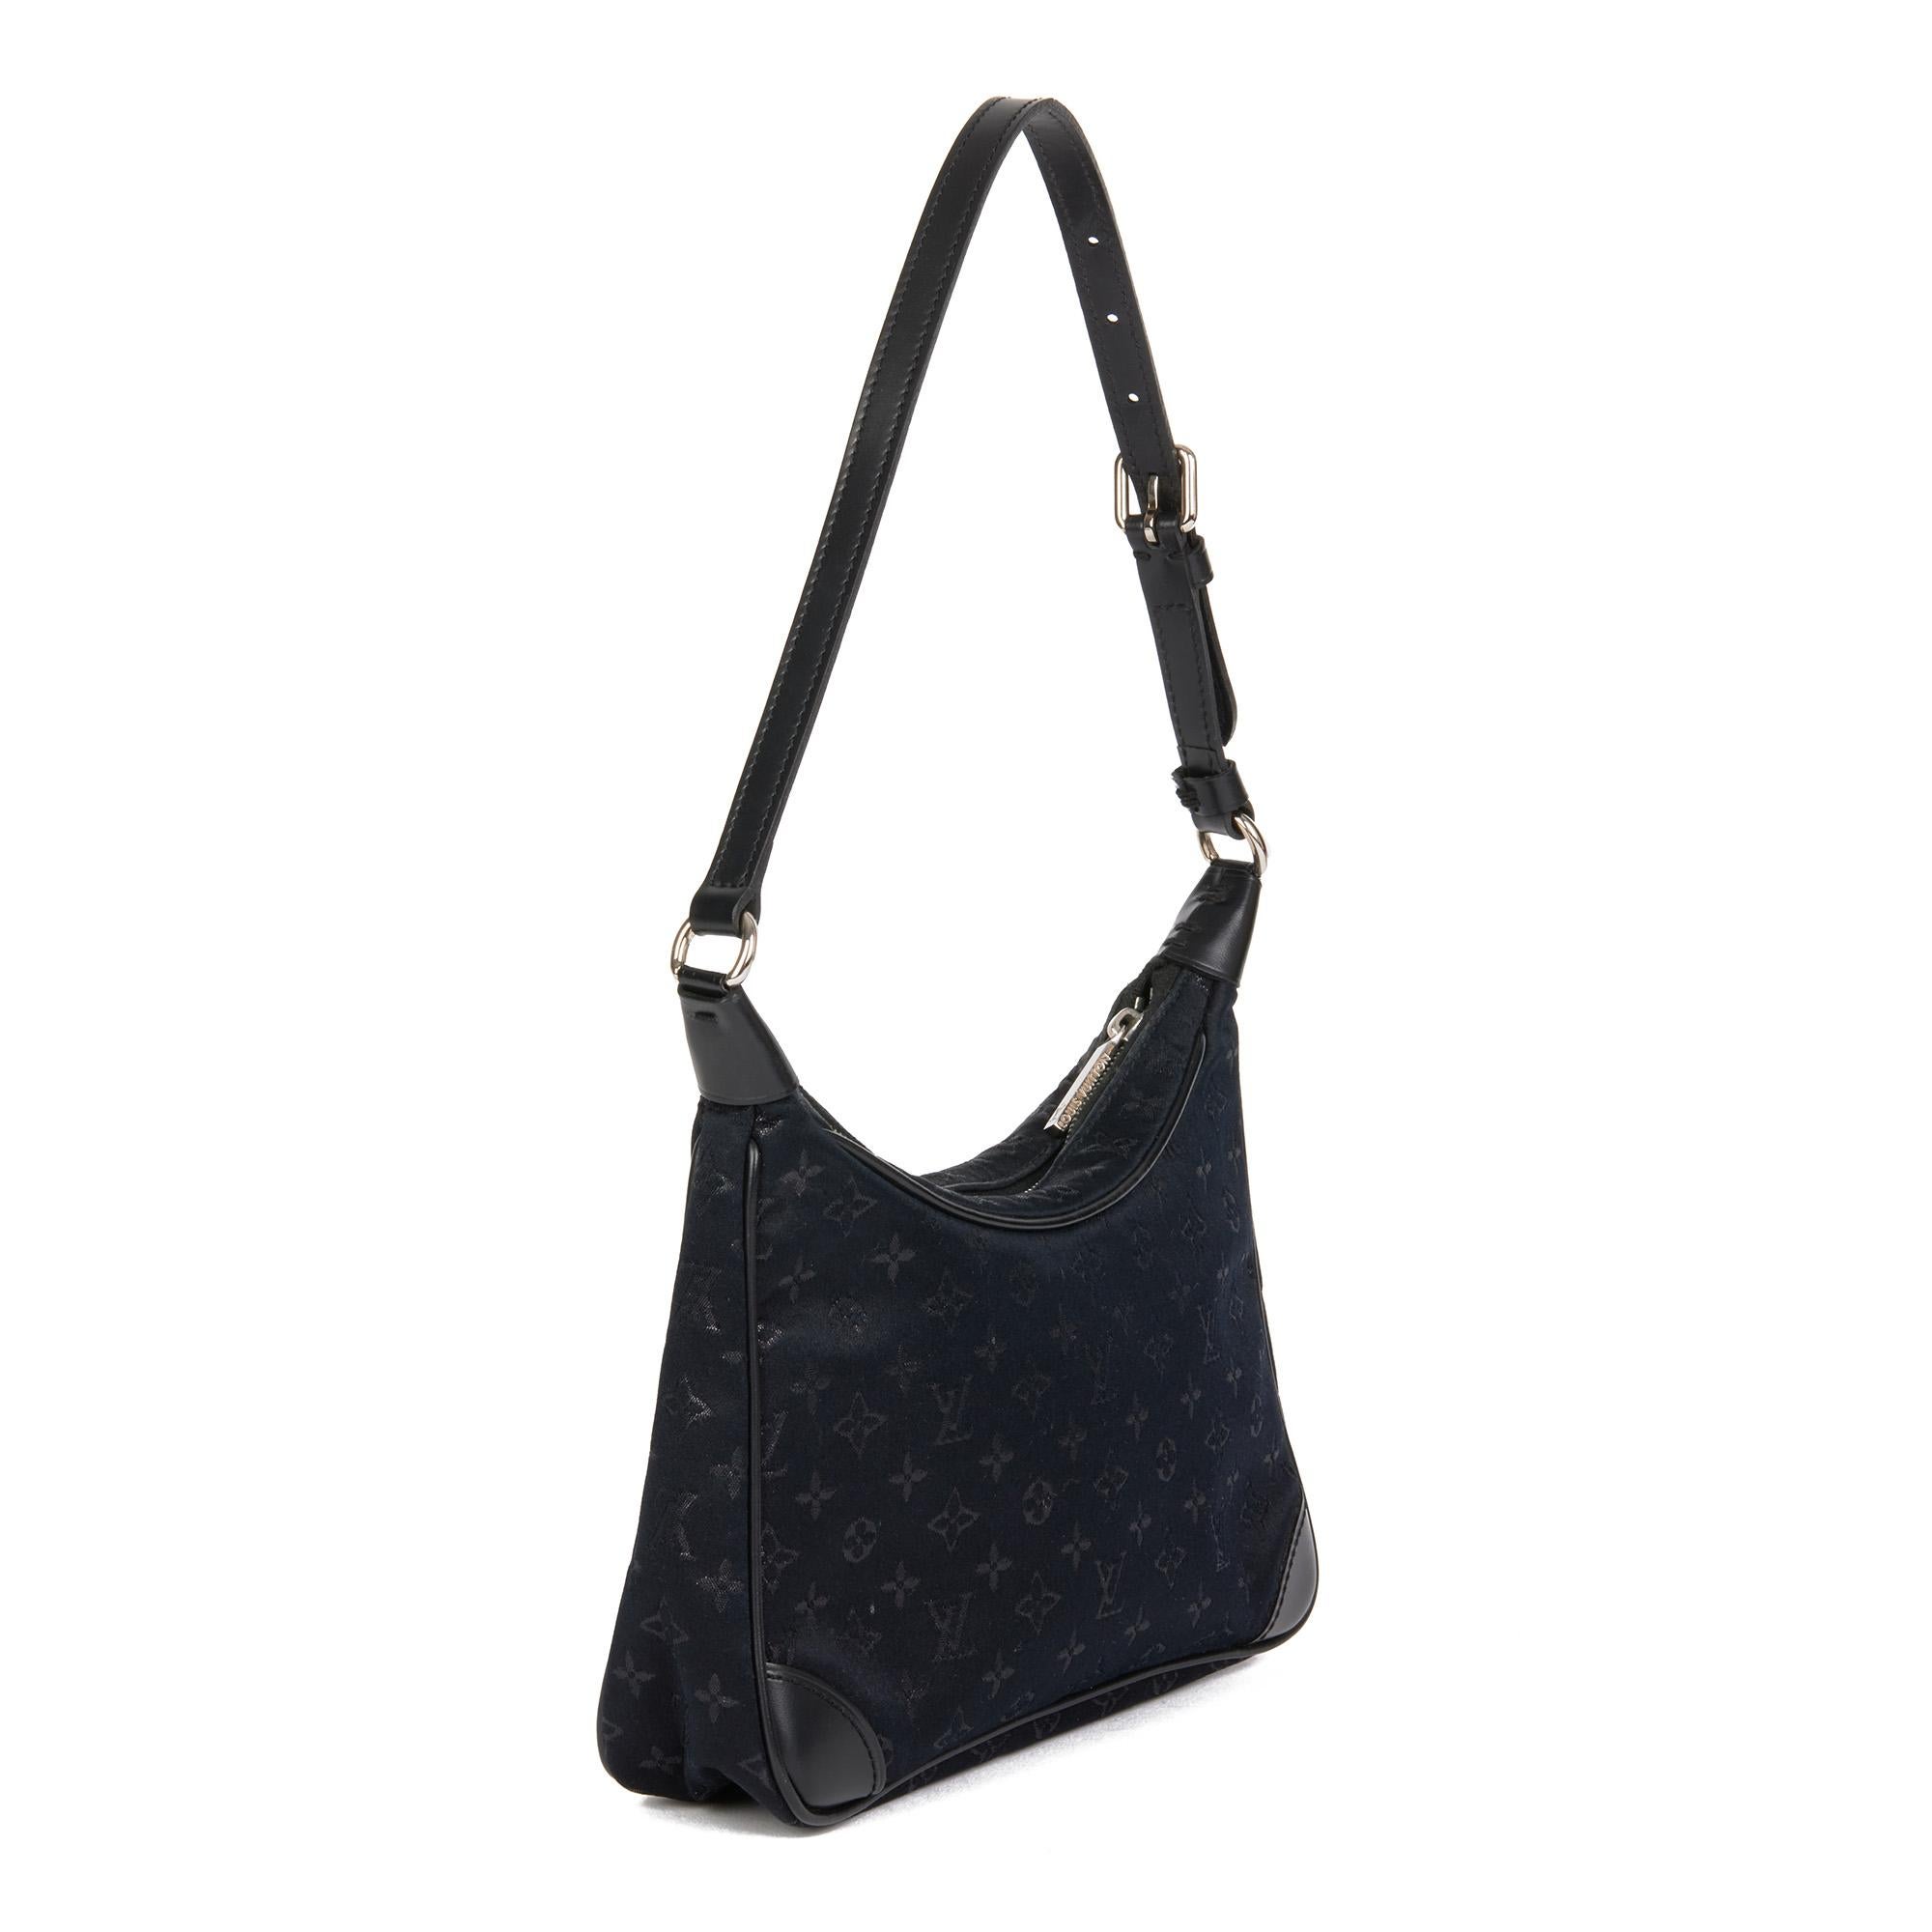 LOUIS VUITTON
Black Monogram Satin & Black Calfskin Leather Vintage Mini Boulogne 

Xupes Reference: CB603
Serial Number: SR0032
Age (Circa): 2002
Accompanied By: Louis Vuitton Dust Bag, Louis Vuitton Receipt
Authenticity Details: Date Stamp (Made